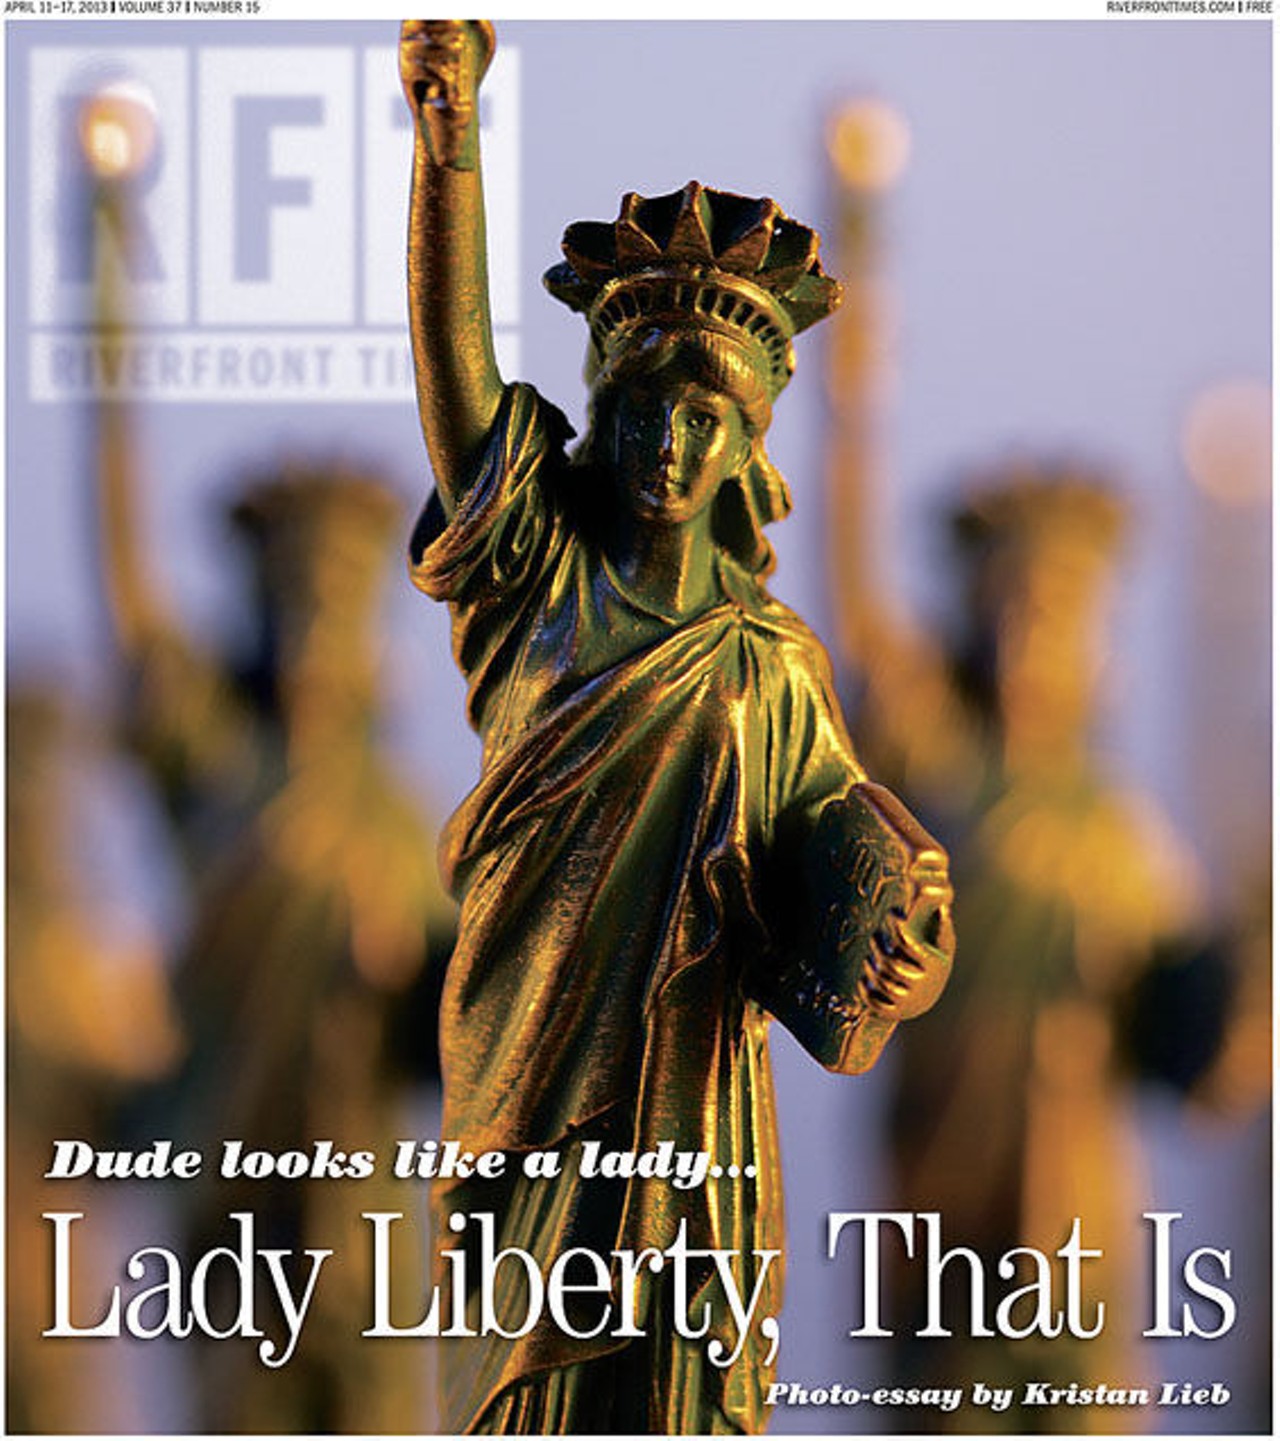 April 11
Photo by Tom Carlson. Statue of Liberty replicas from Grand Slam New York. Read "Dude Looks Like a Lady. . . Lady Liberty, That Is."